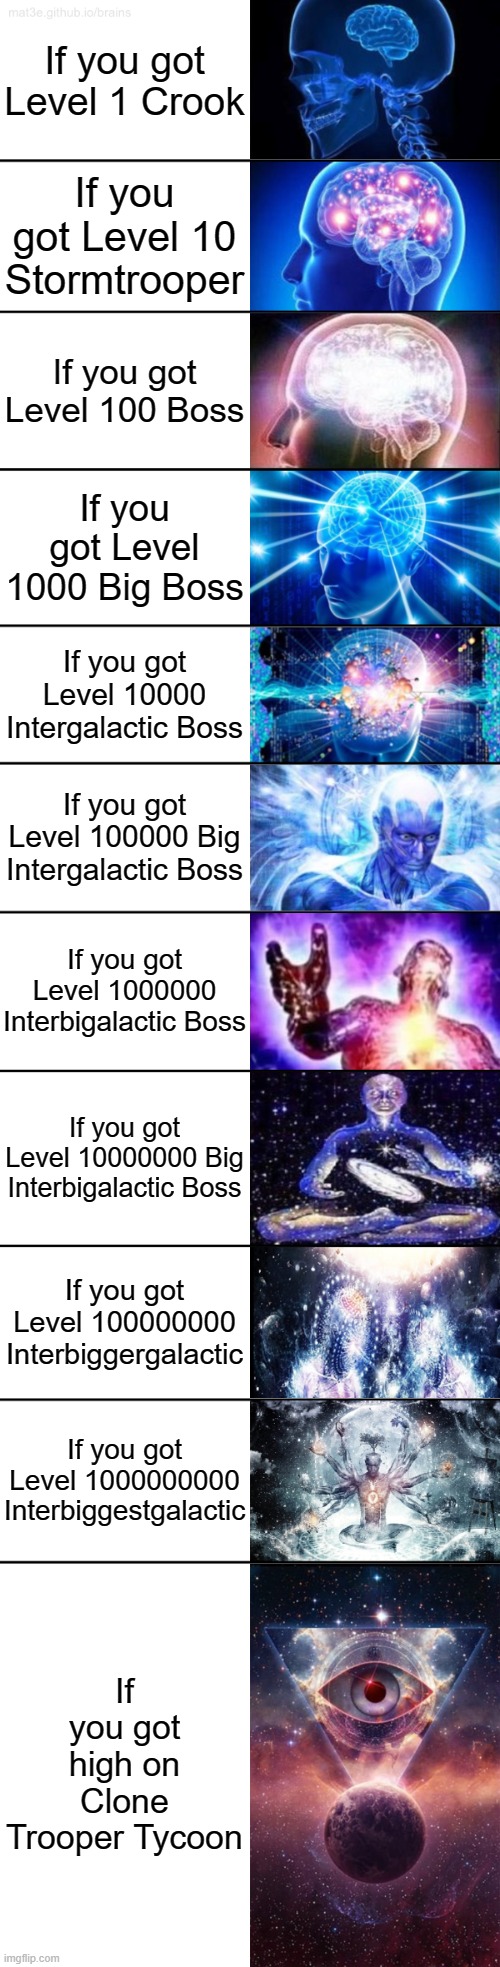 Got stormtrooper level expand (1) | If you got Level 1 Crook; If you got Level 10 Stormtrooper; If you got Level 100 Boss; If you got Level 1000 Big Boss; If you got Level 10000 Intergalactic Boss; If you got Level 100000 Big Intergalactic Boss; If you got Level 1000000 Interbigalactic Boss; If you got Level 10000000 Big Interbigalactic Boss; If you got Level 100000000 Interbiggergalactic; If you got Level 1000000000 Interbiggestgalactic; If you got high on Clone Trooper Tycoon | image tagged in 11-tier expanding brain | made w/ Imgflip meme maker